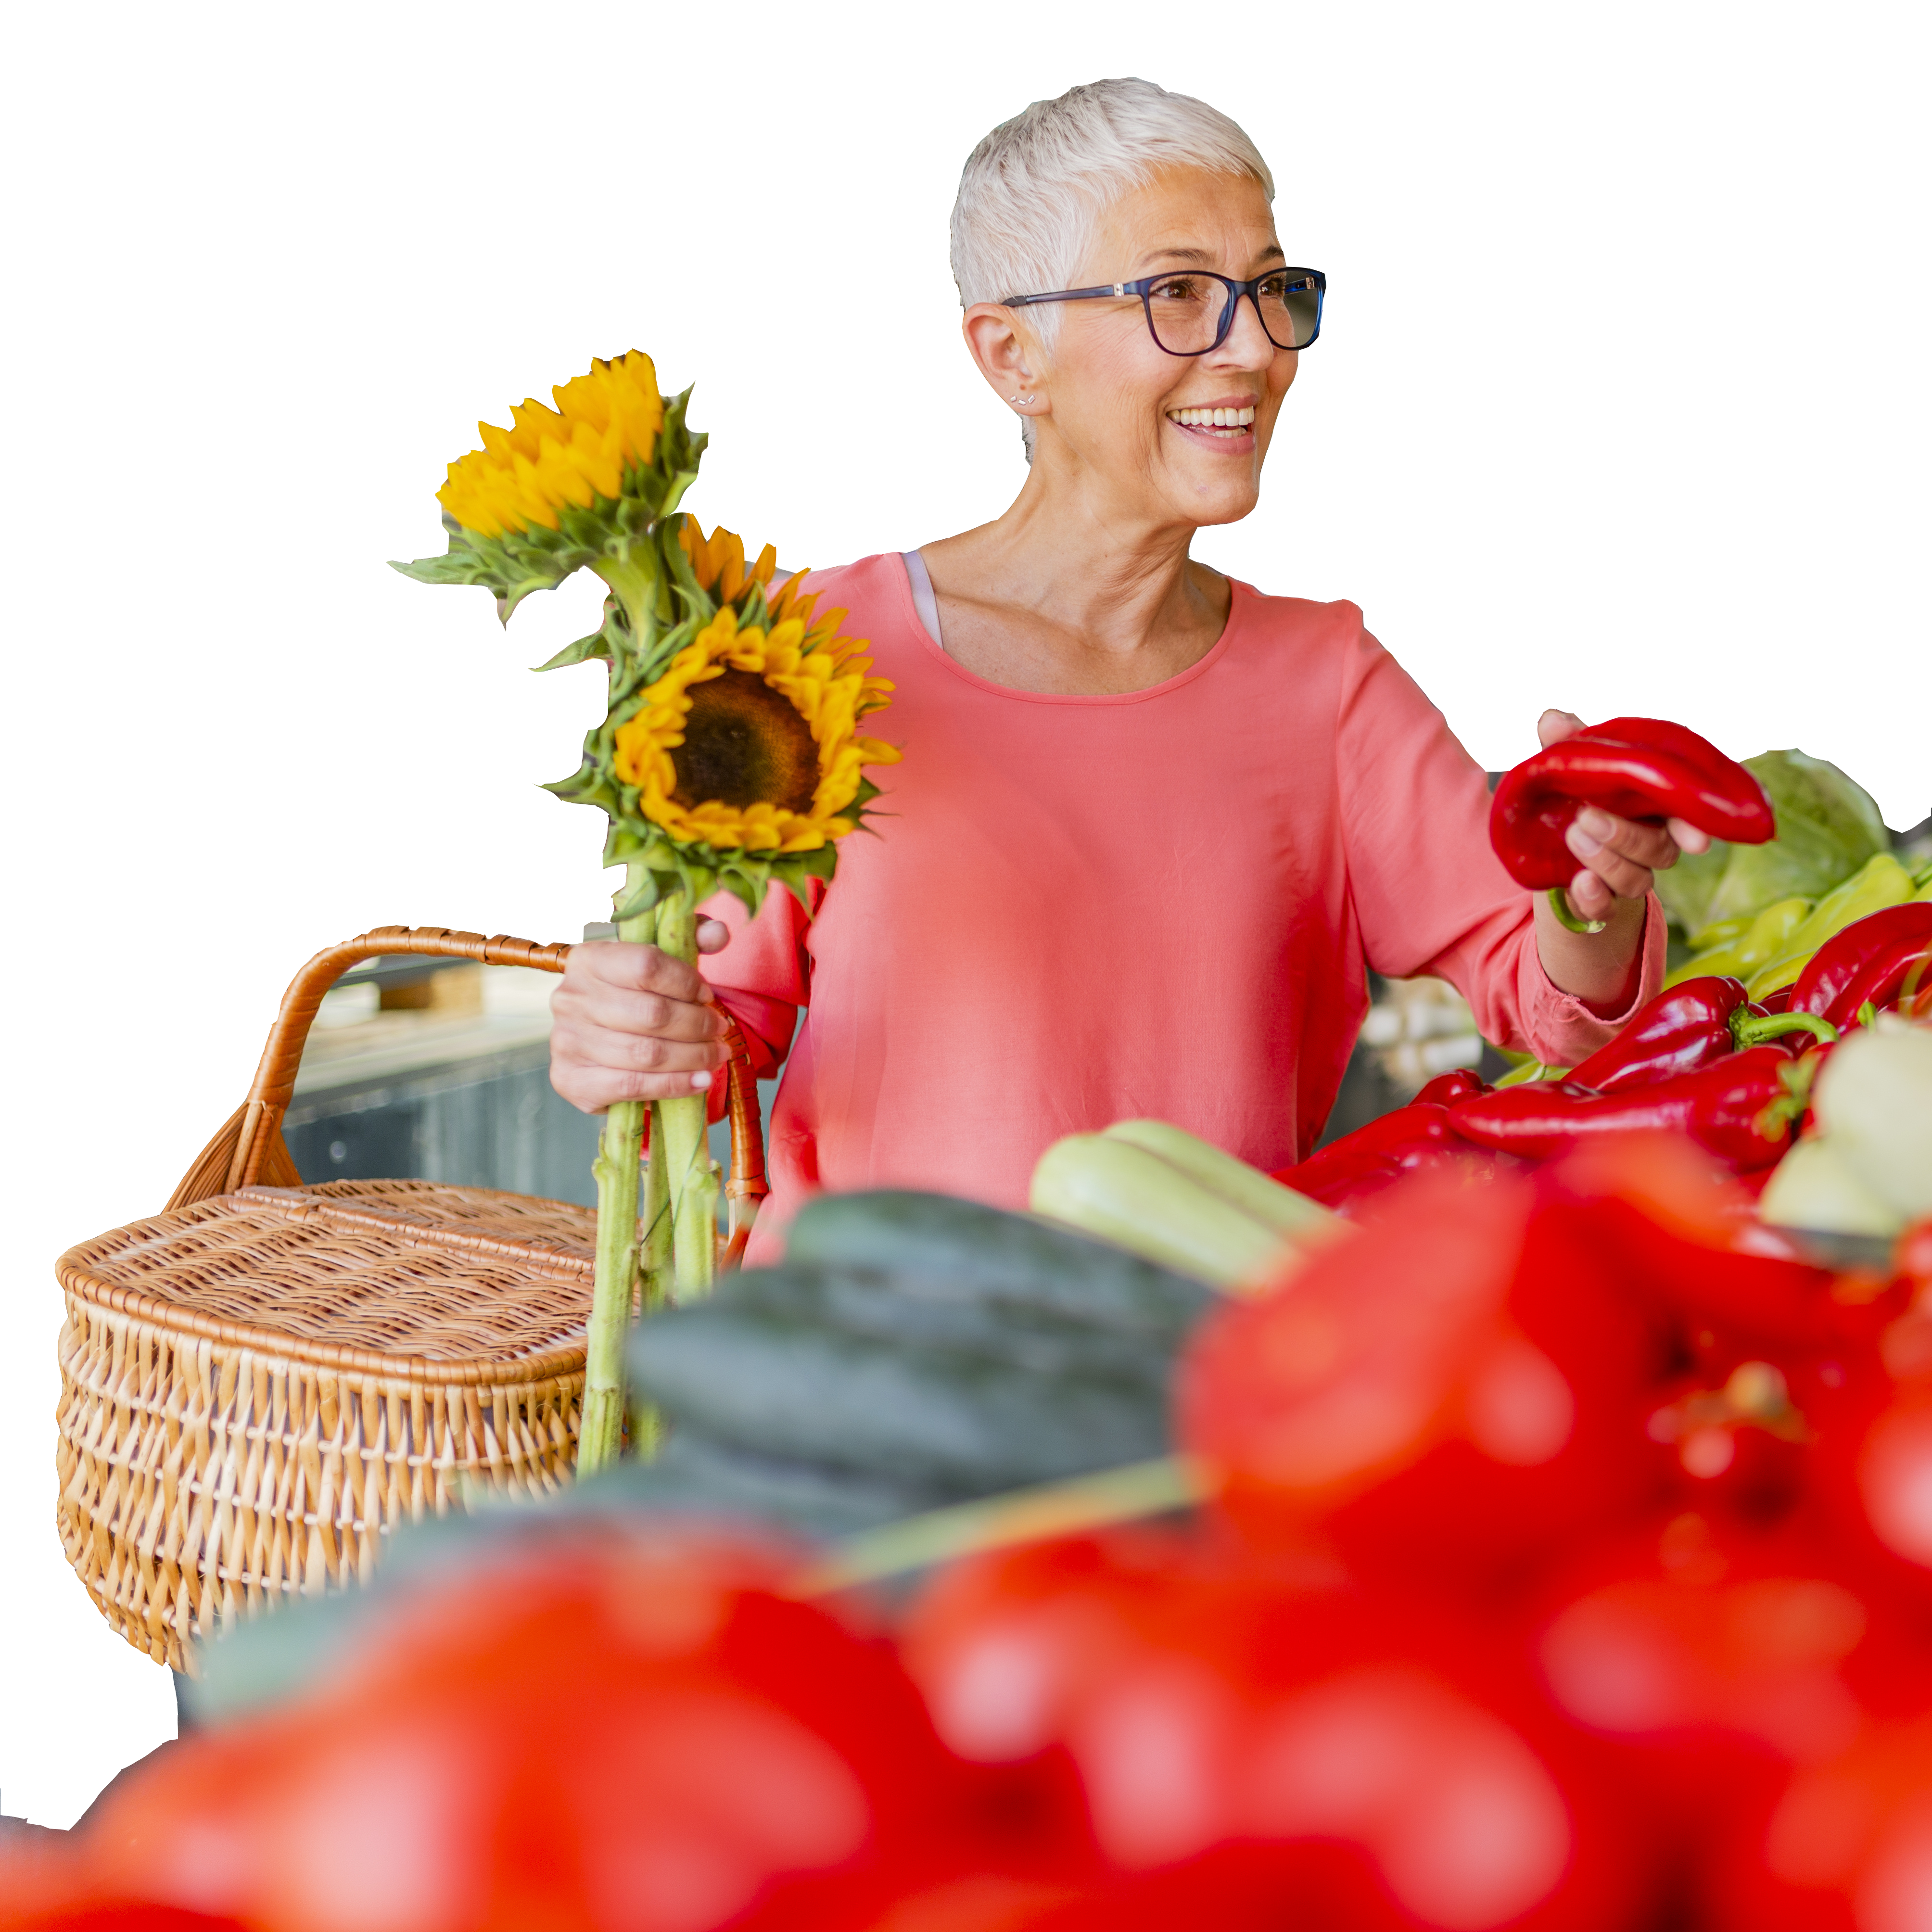 An older woman is smiling and holding a basket, sunflowers, and a red pepper.